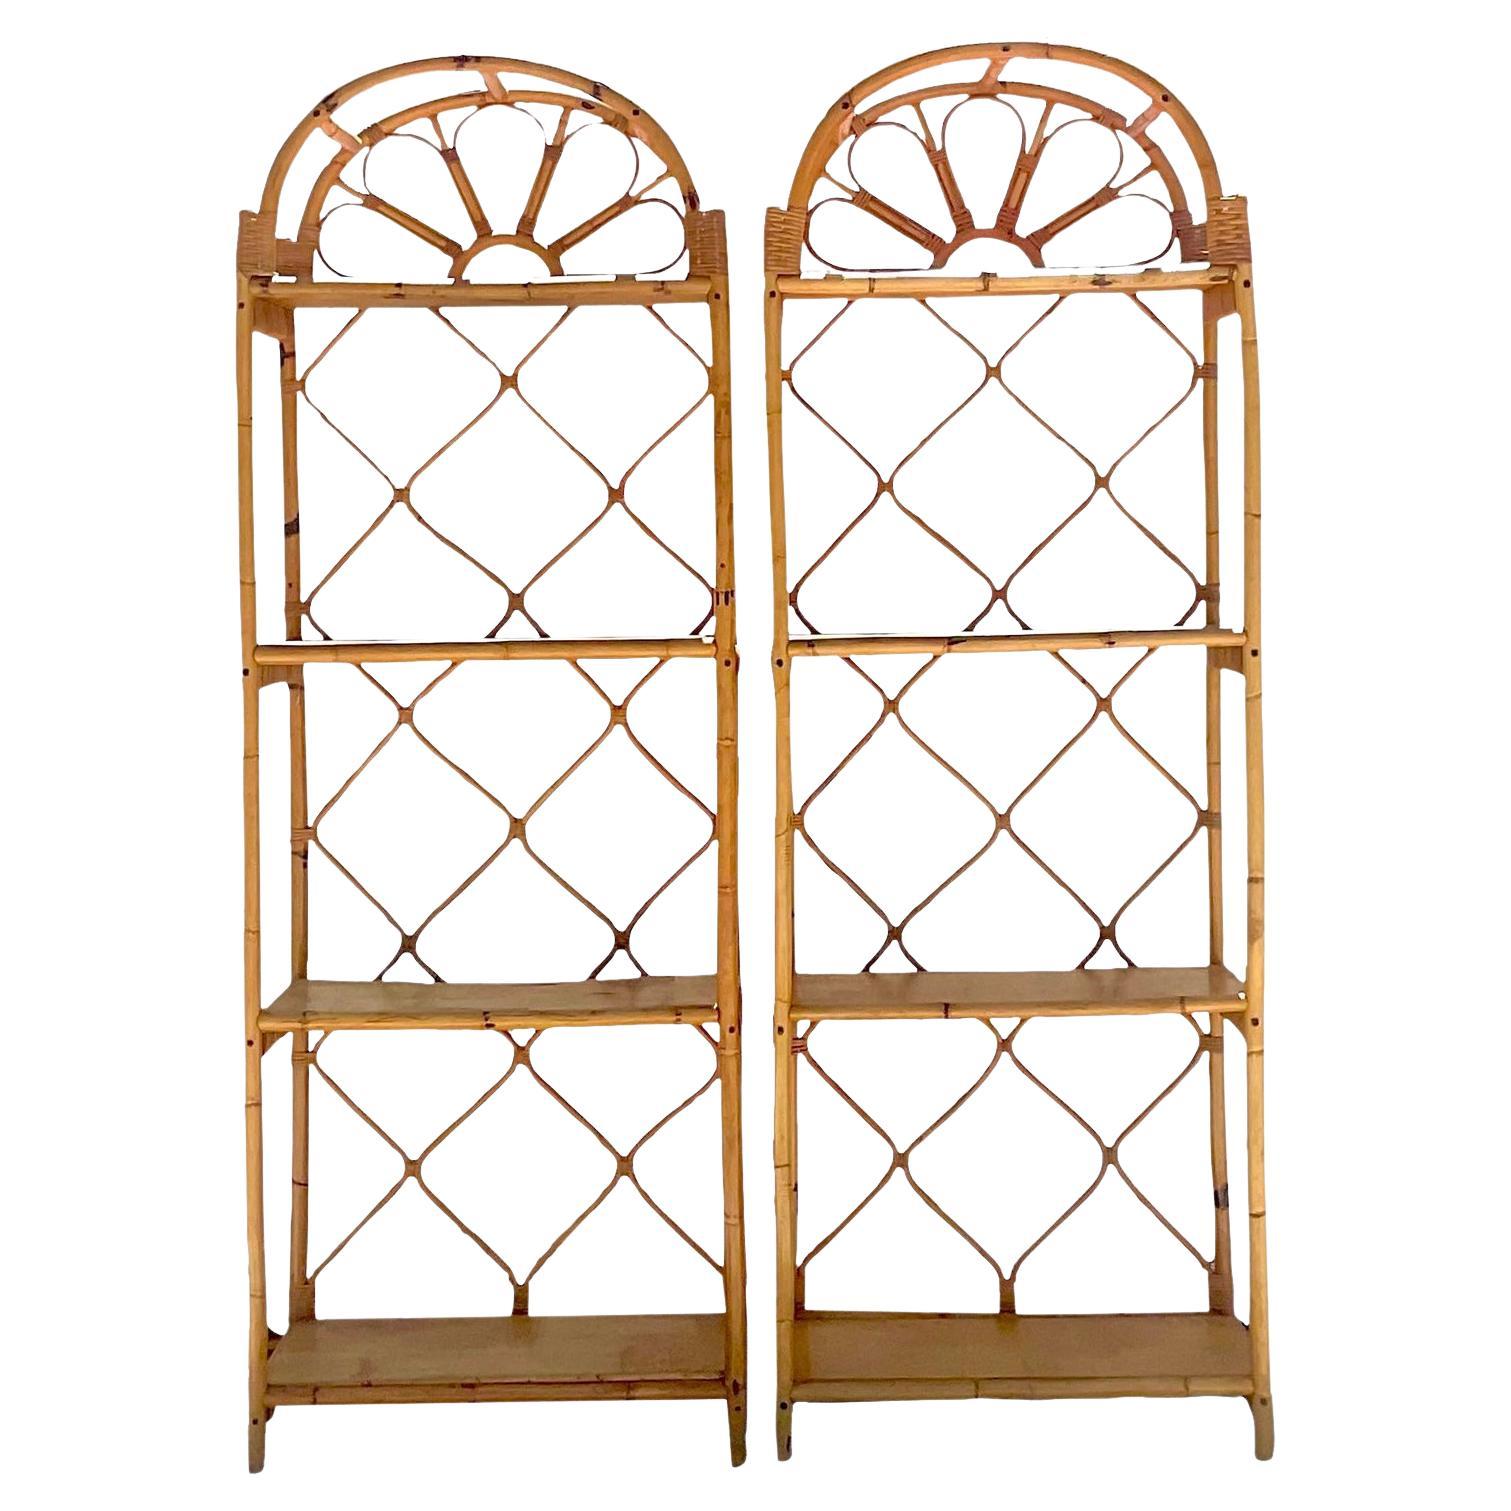 Late 20th Century Vintage Coastal Arched Rattan Etagere, a Pair